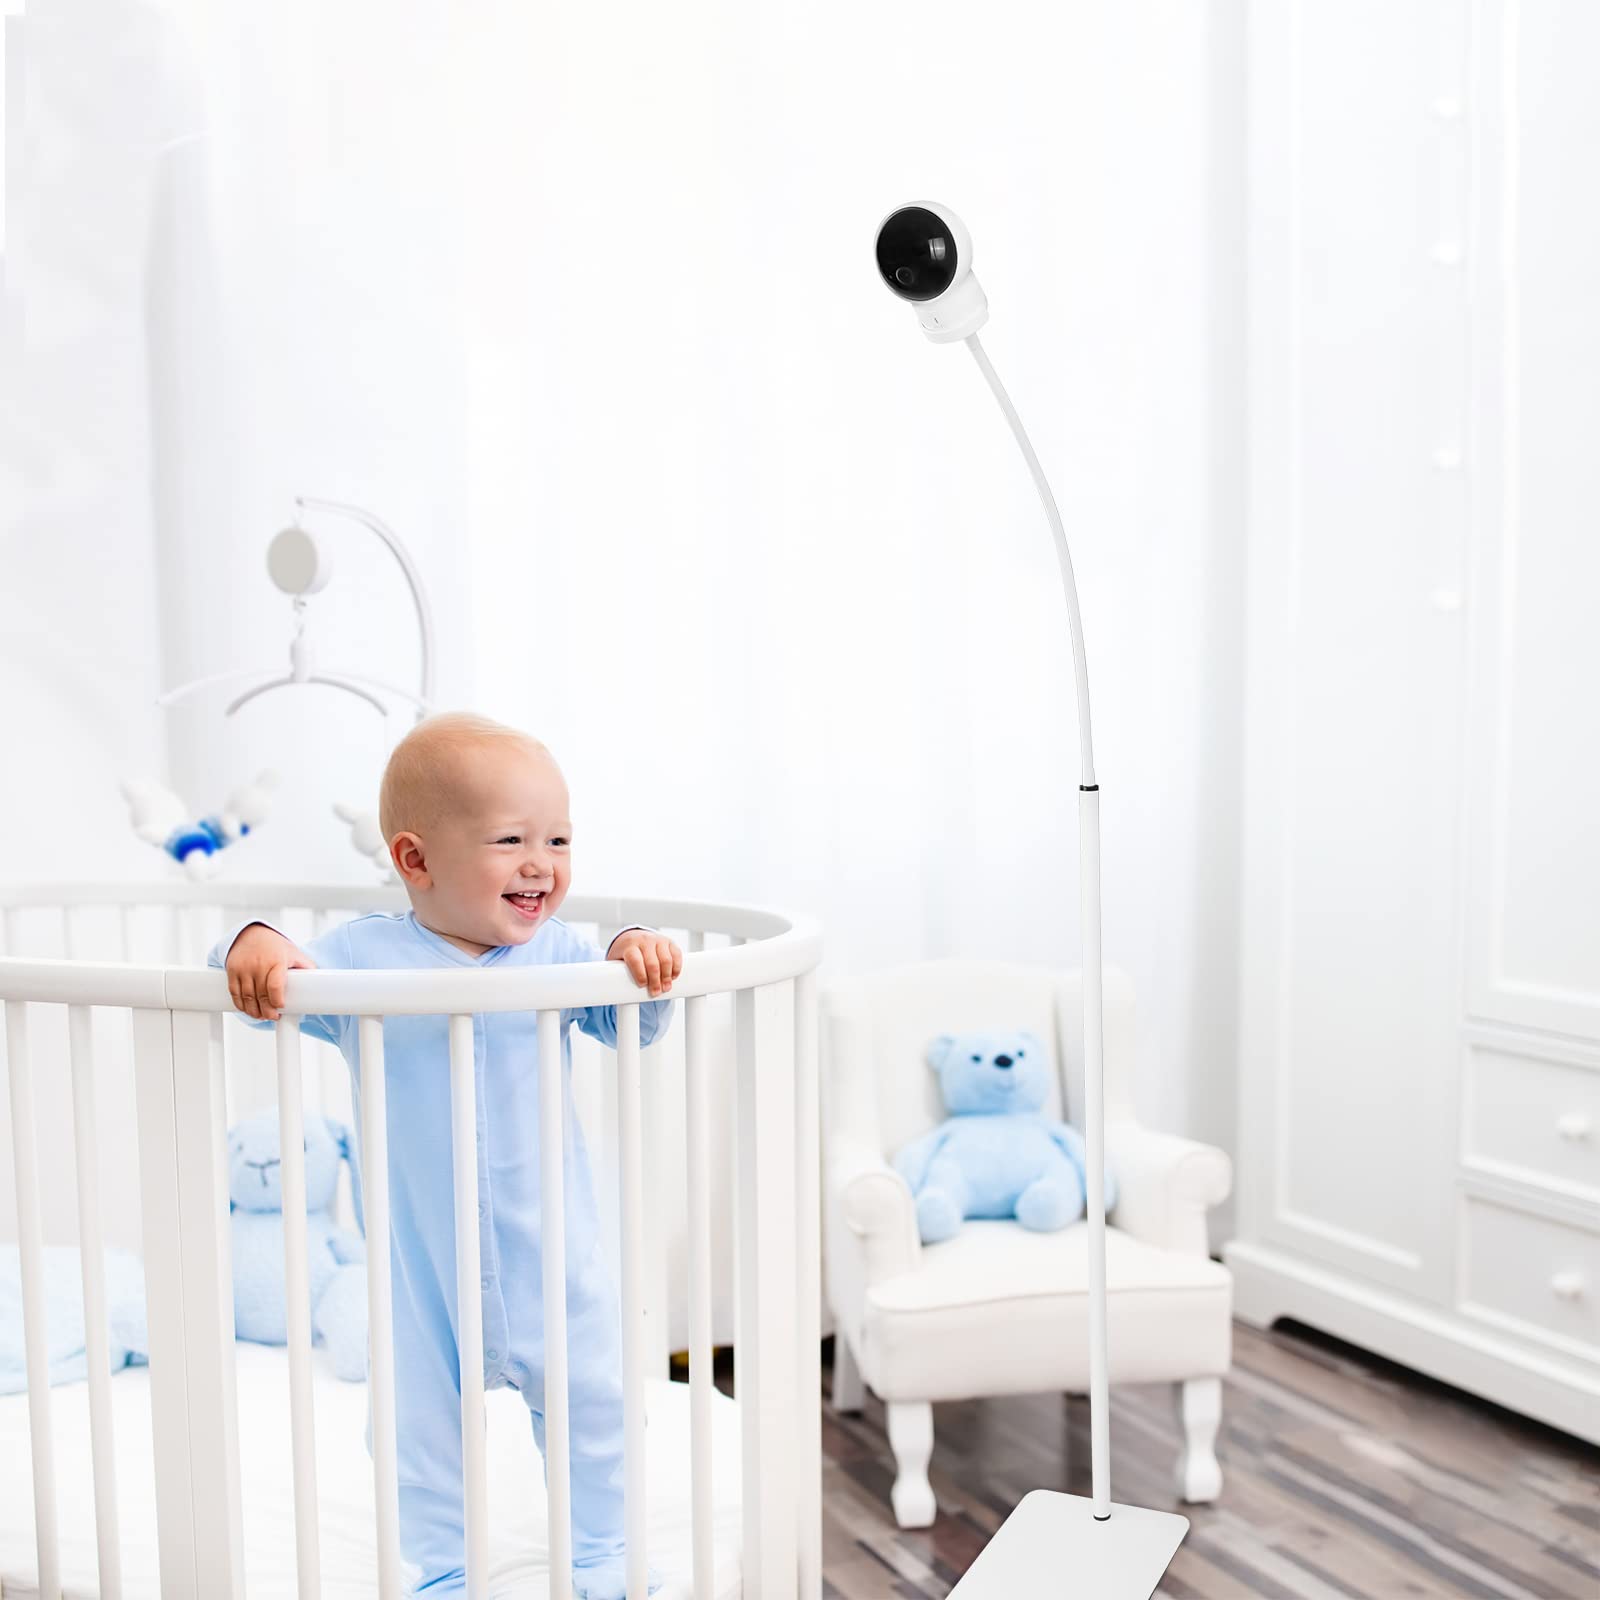 HOLACA 35 inch or 63 inch Floor Stand for Infant Optics DXR-8/DXR-8 Pro,eufy Baby Monitor,Vava/Hipp and Nooie Baby Monitor,Owlet and Motorola Baby Monitor, for Any Other Cameras with 1/4 Screw Mount